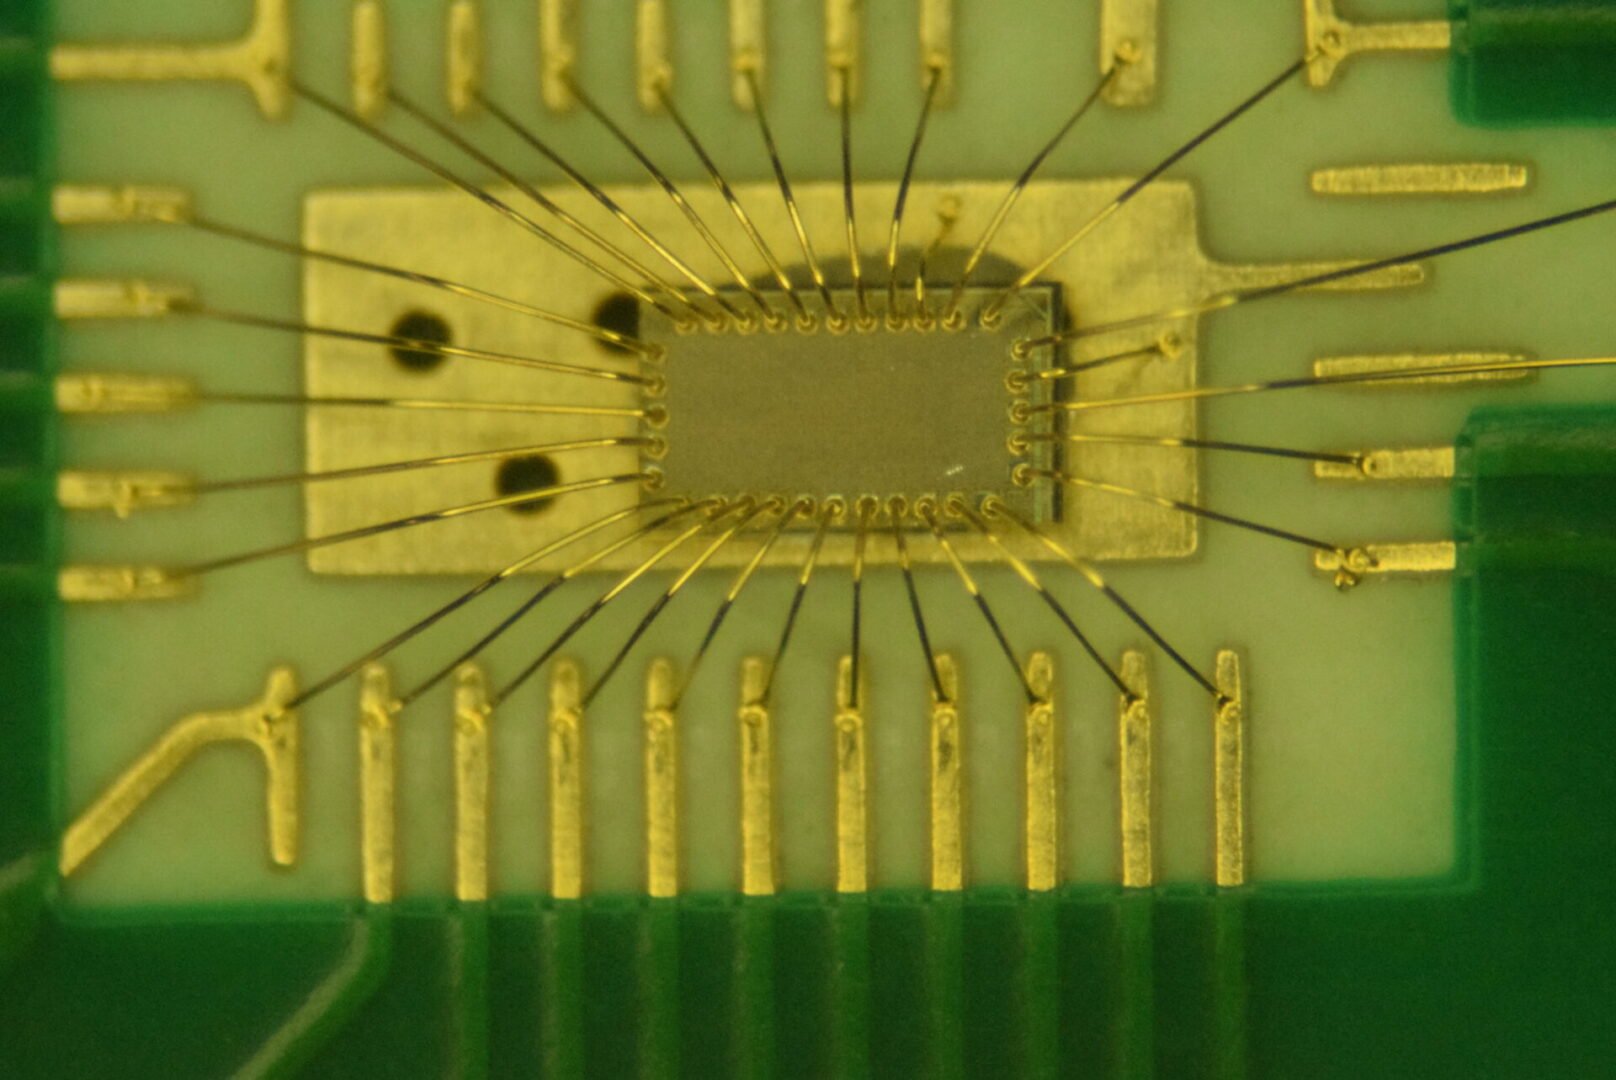 A close up of the inside of an electronic device.